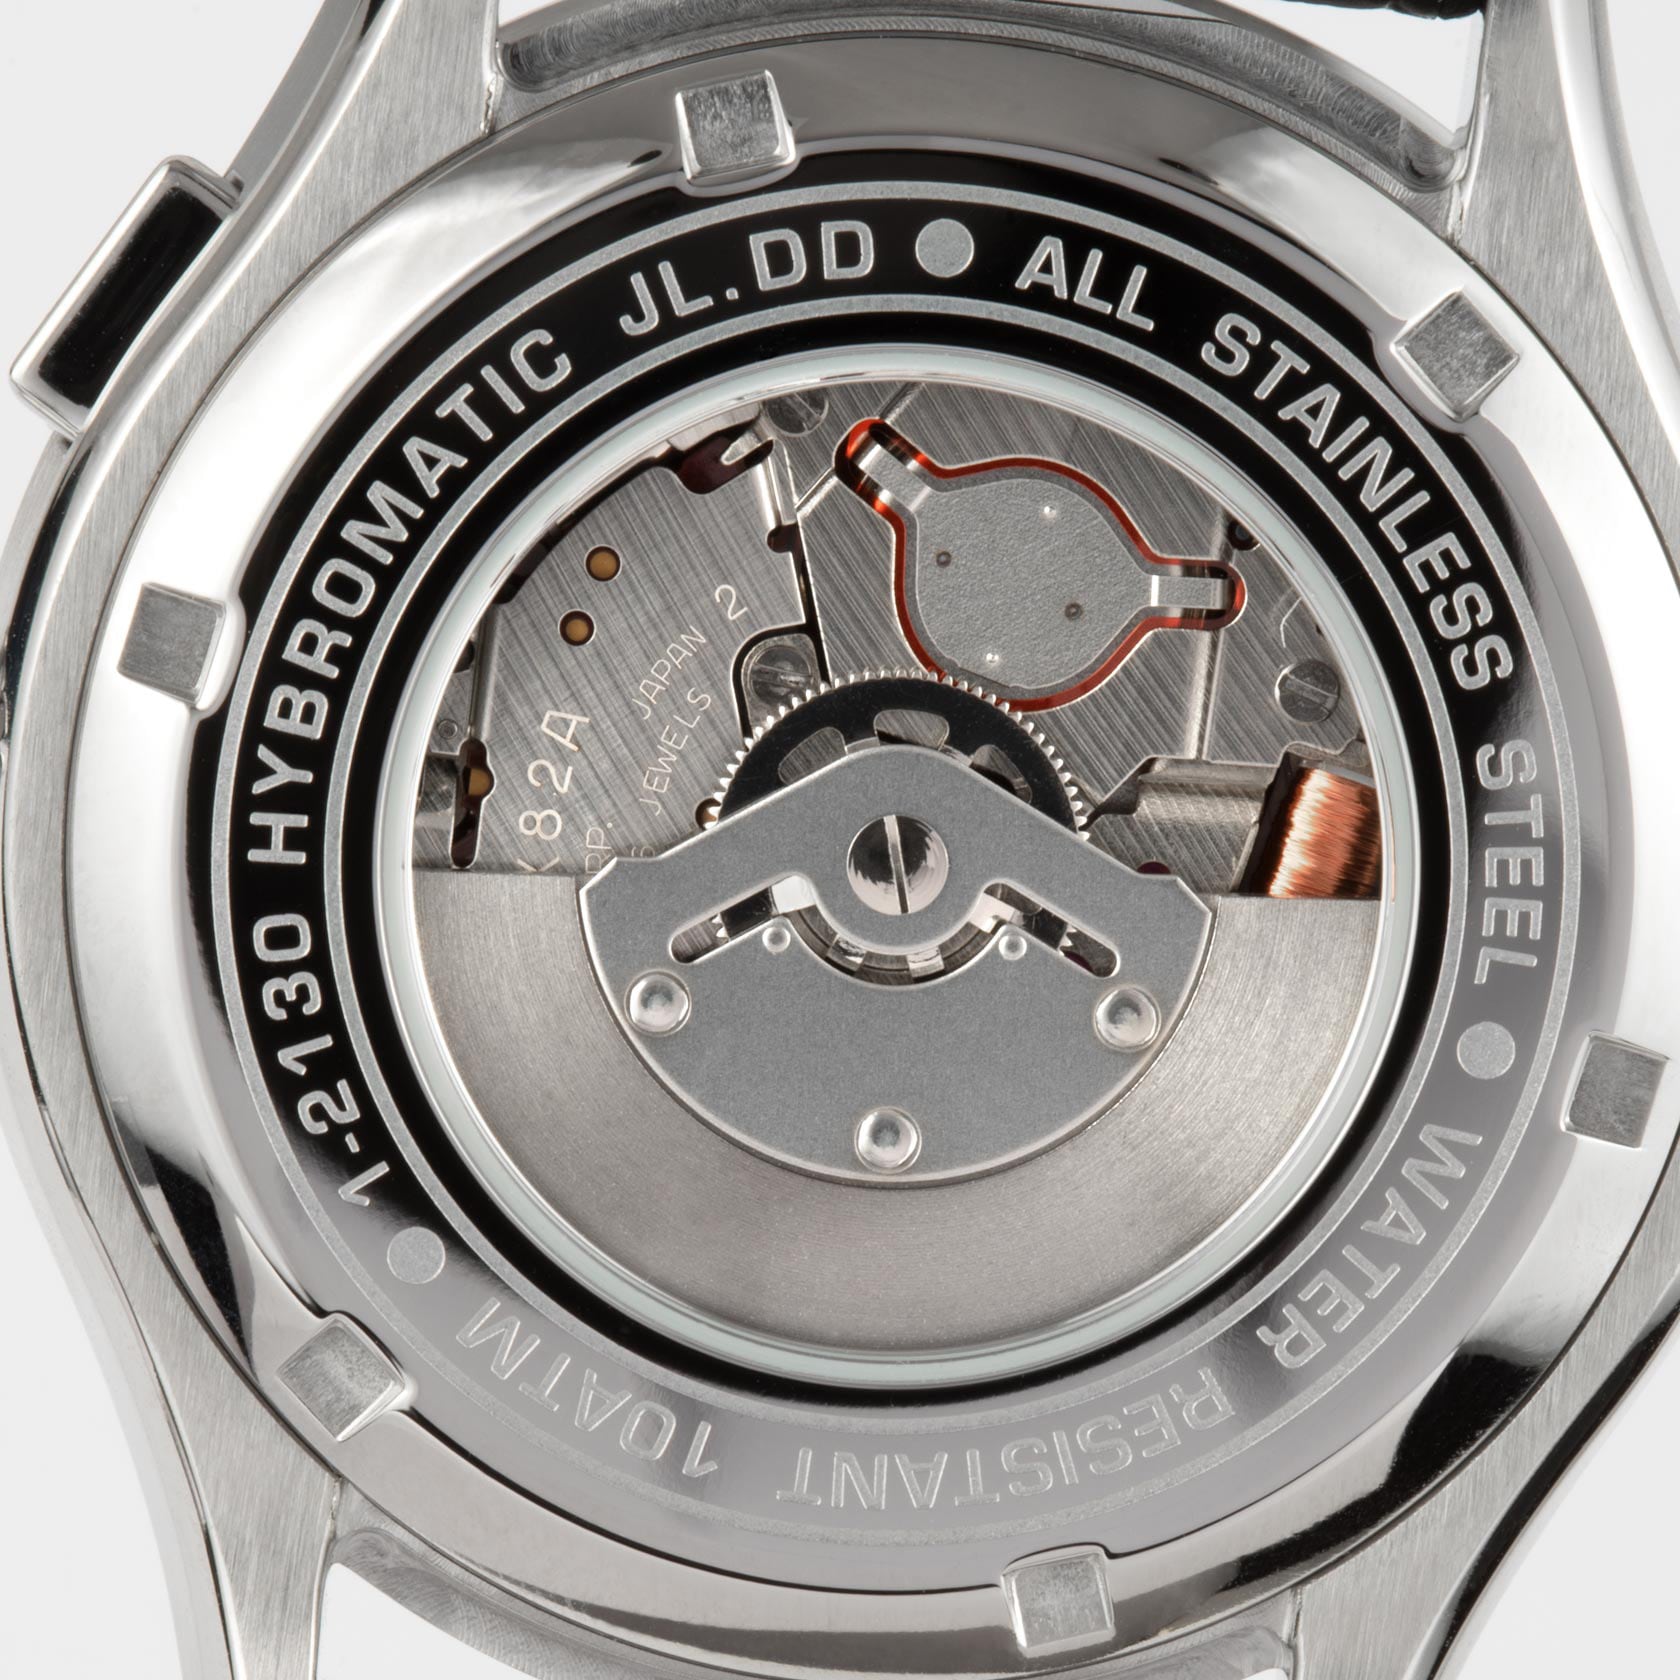 »Hybromatic, 1-2130B« Lemans online Kineticuhr bei Jacques OTTO kaufen